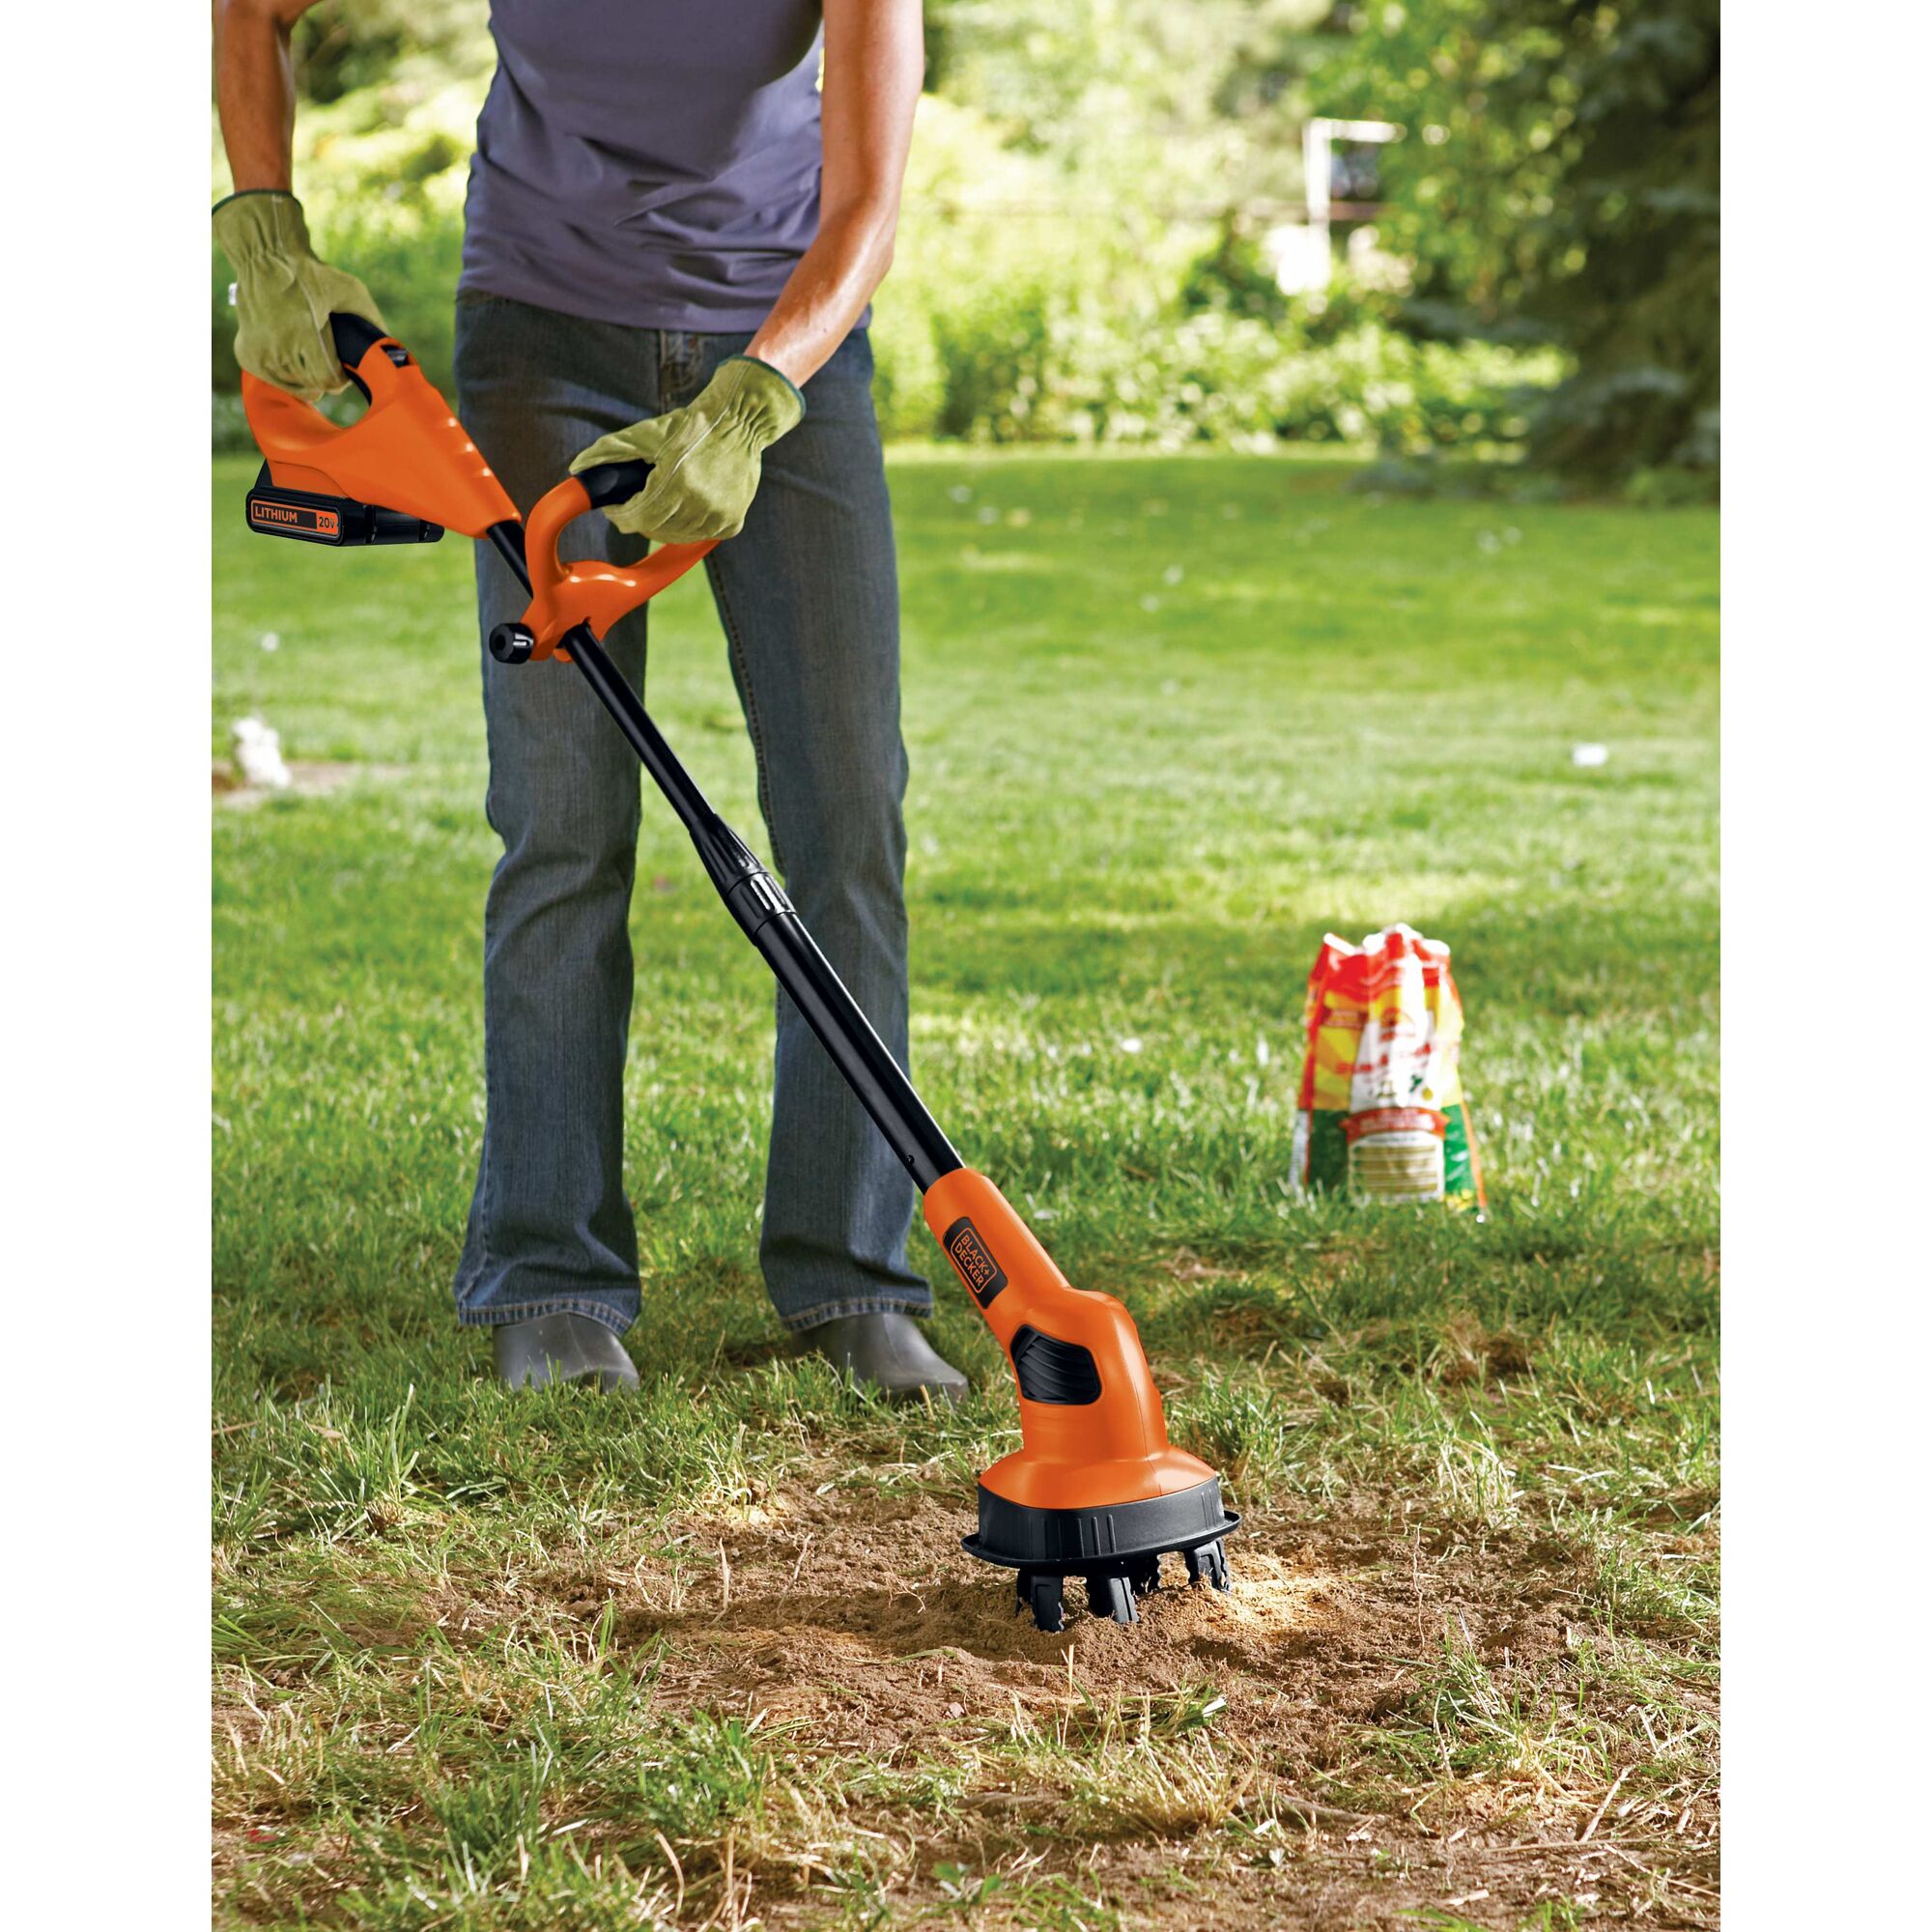 20 volt max lithium garden cultivator being used by person outdoors